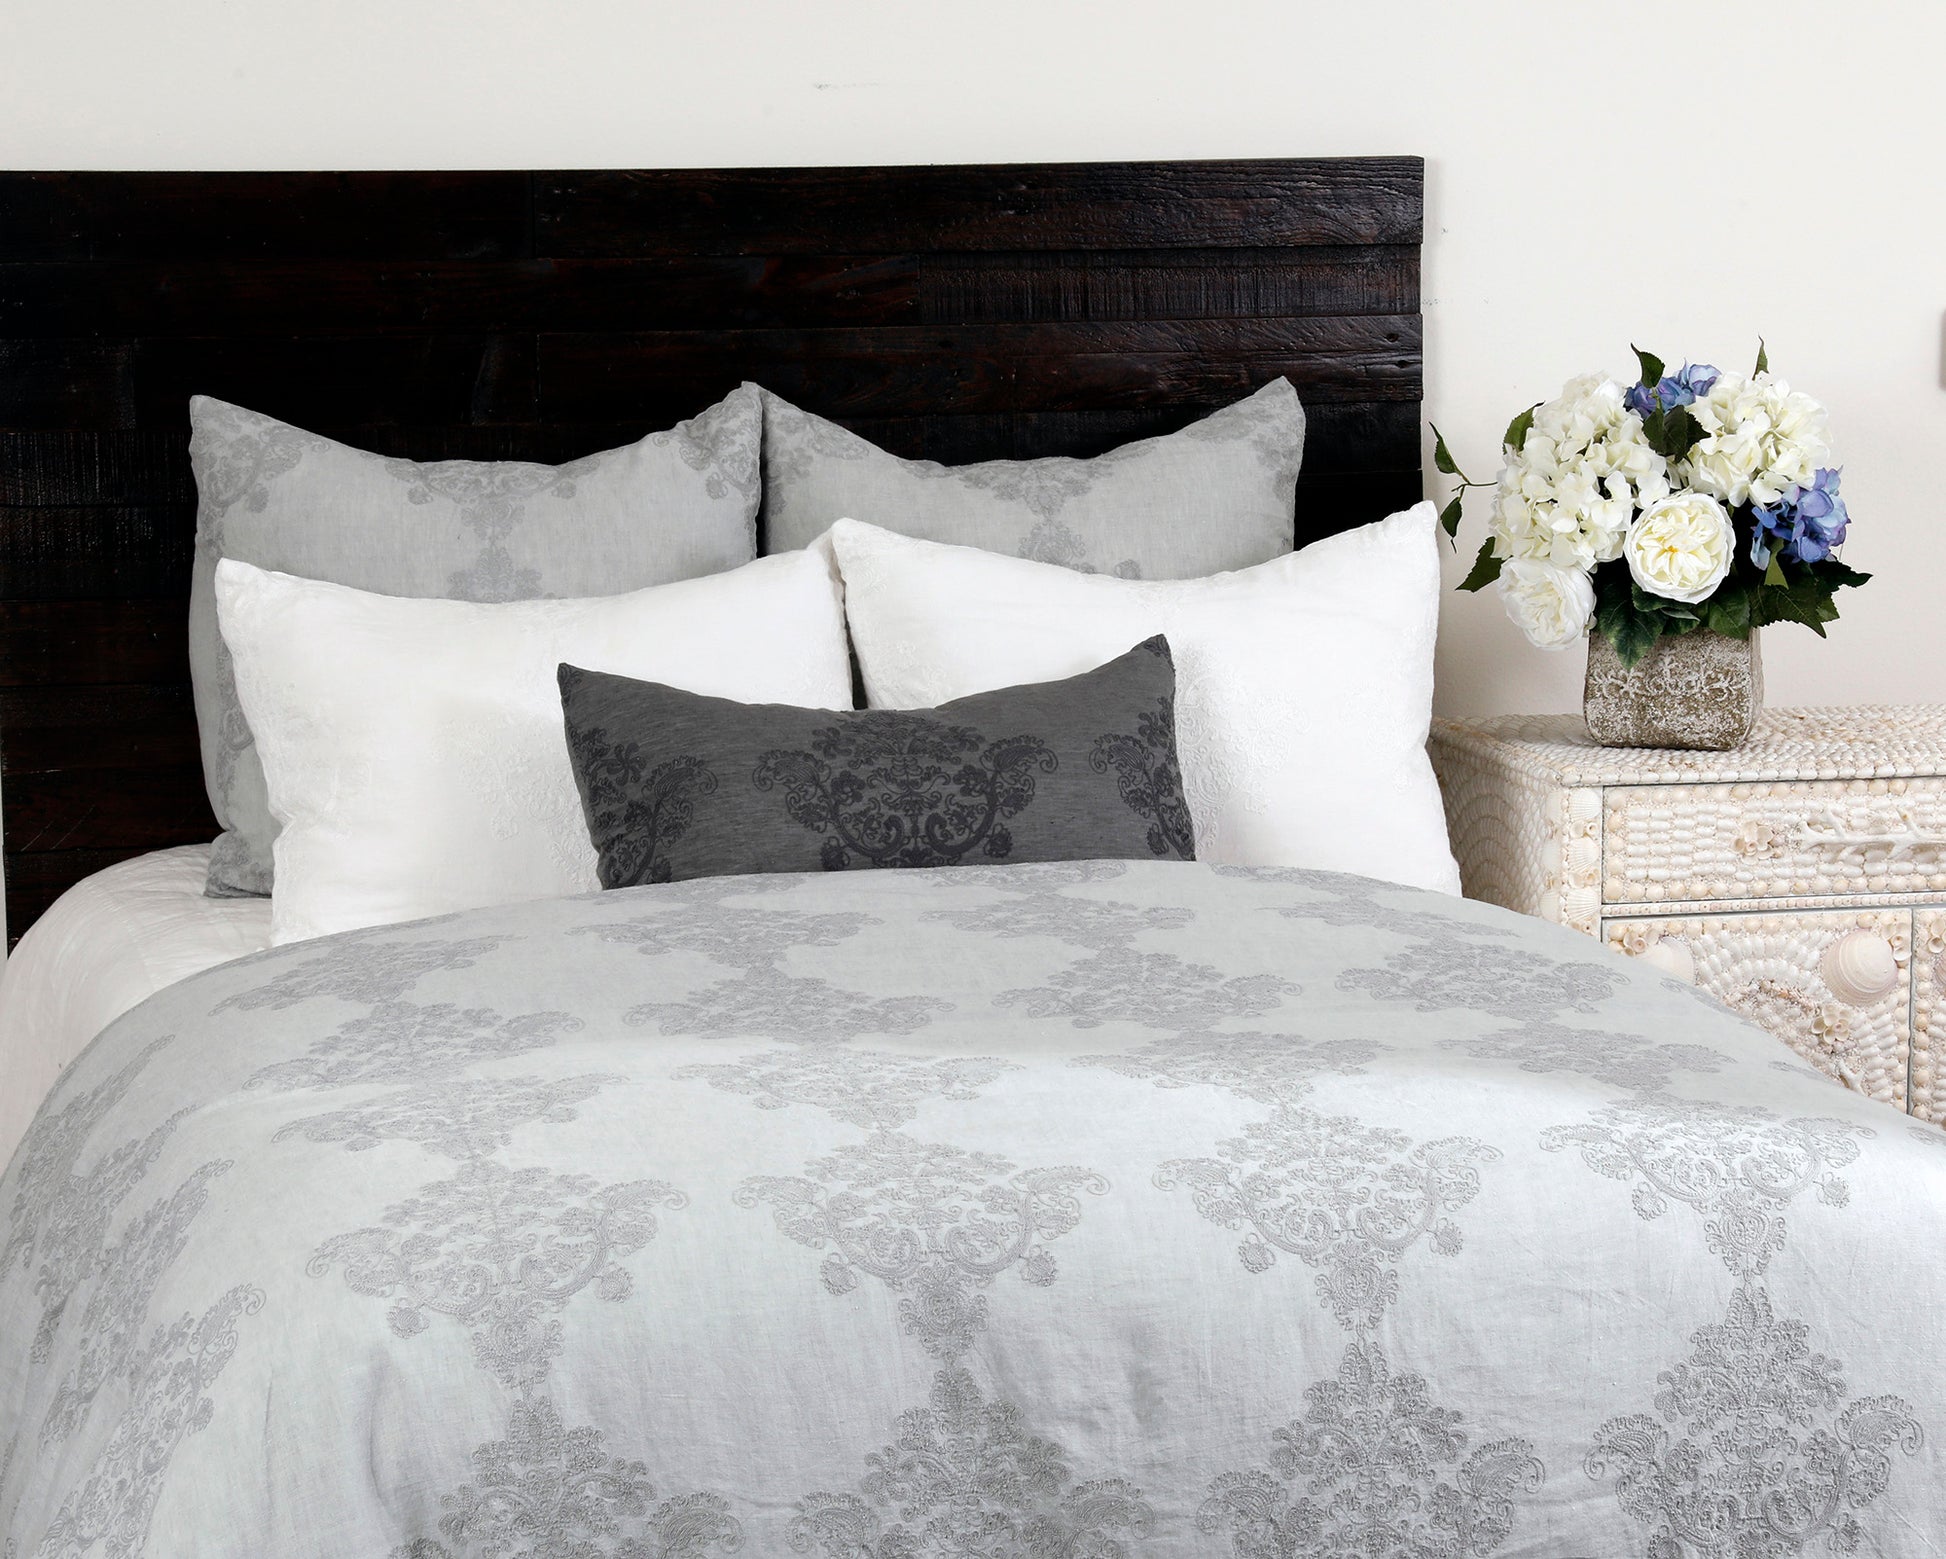 Shop Duvet Cover and Shams online for luxurious bedding